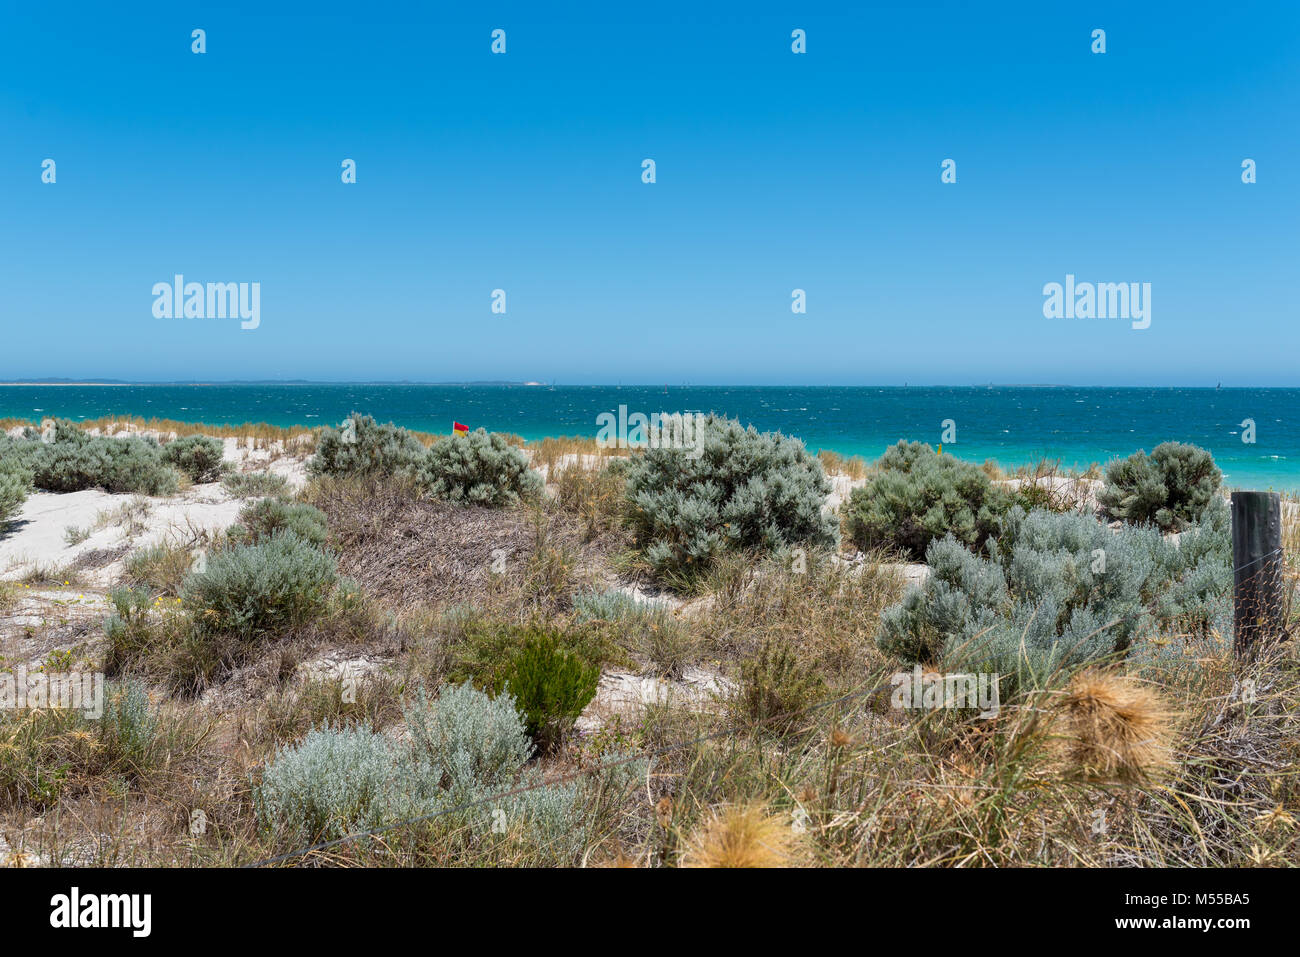 PERTH, Australia, WA / Western Australia - 2017 December 31, Coogee, Perth, Coogee Beach . (Photo by Ulrich Roth/www.ulrich-roth.com) +++ Releases: Mo Stock Photo